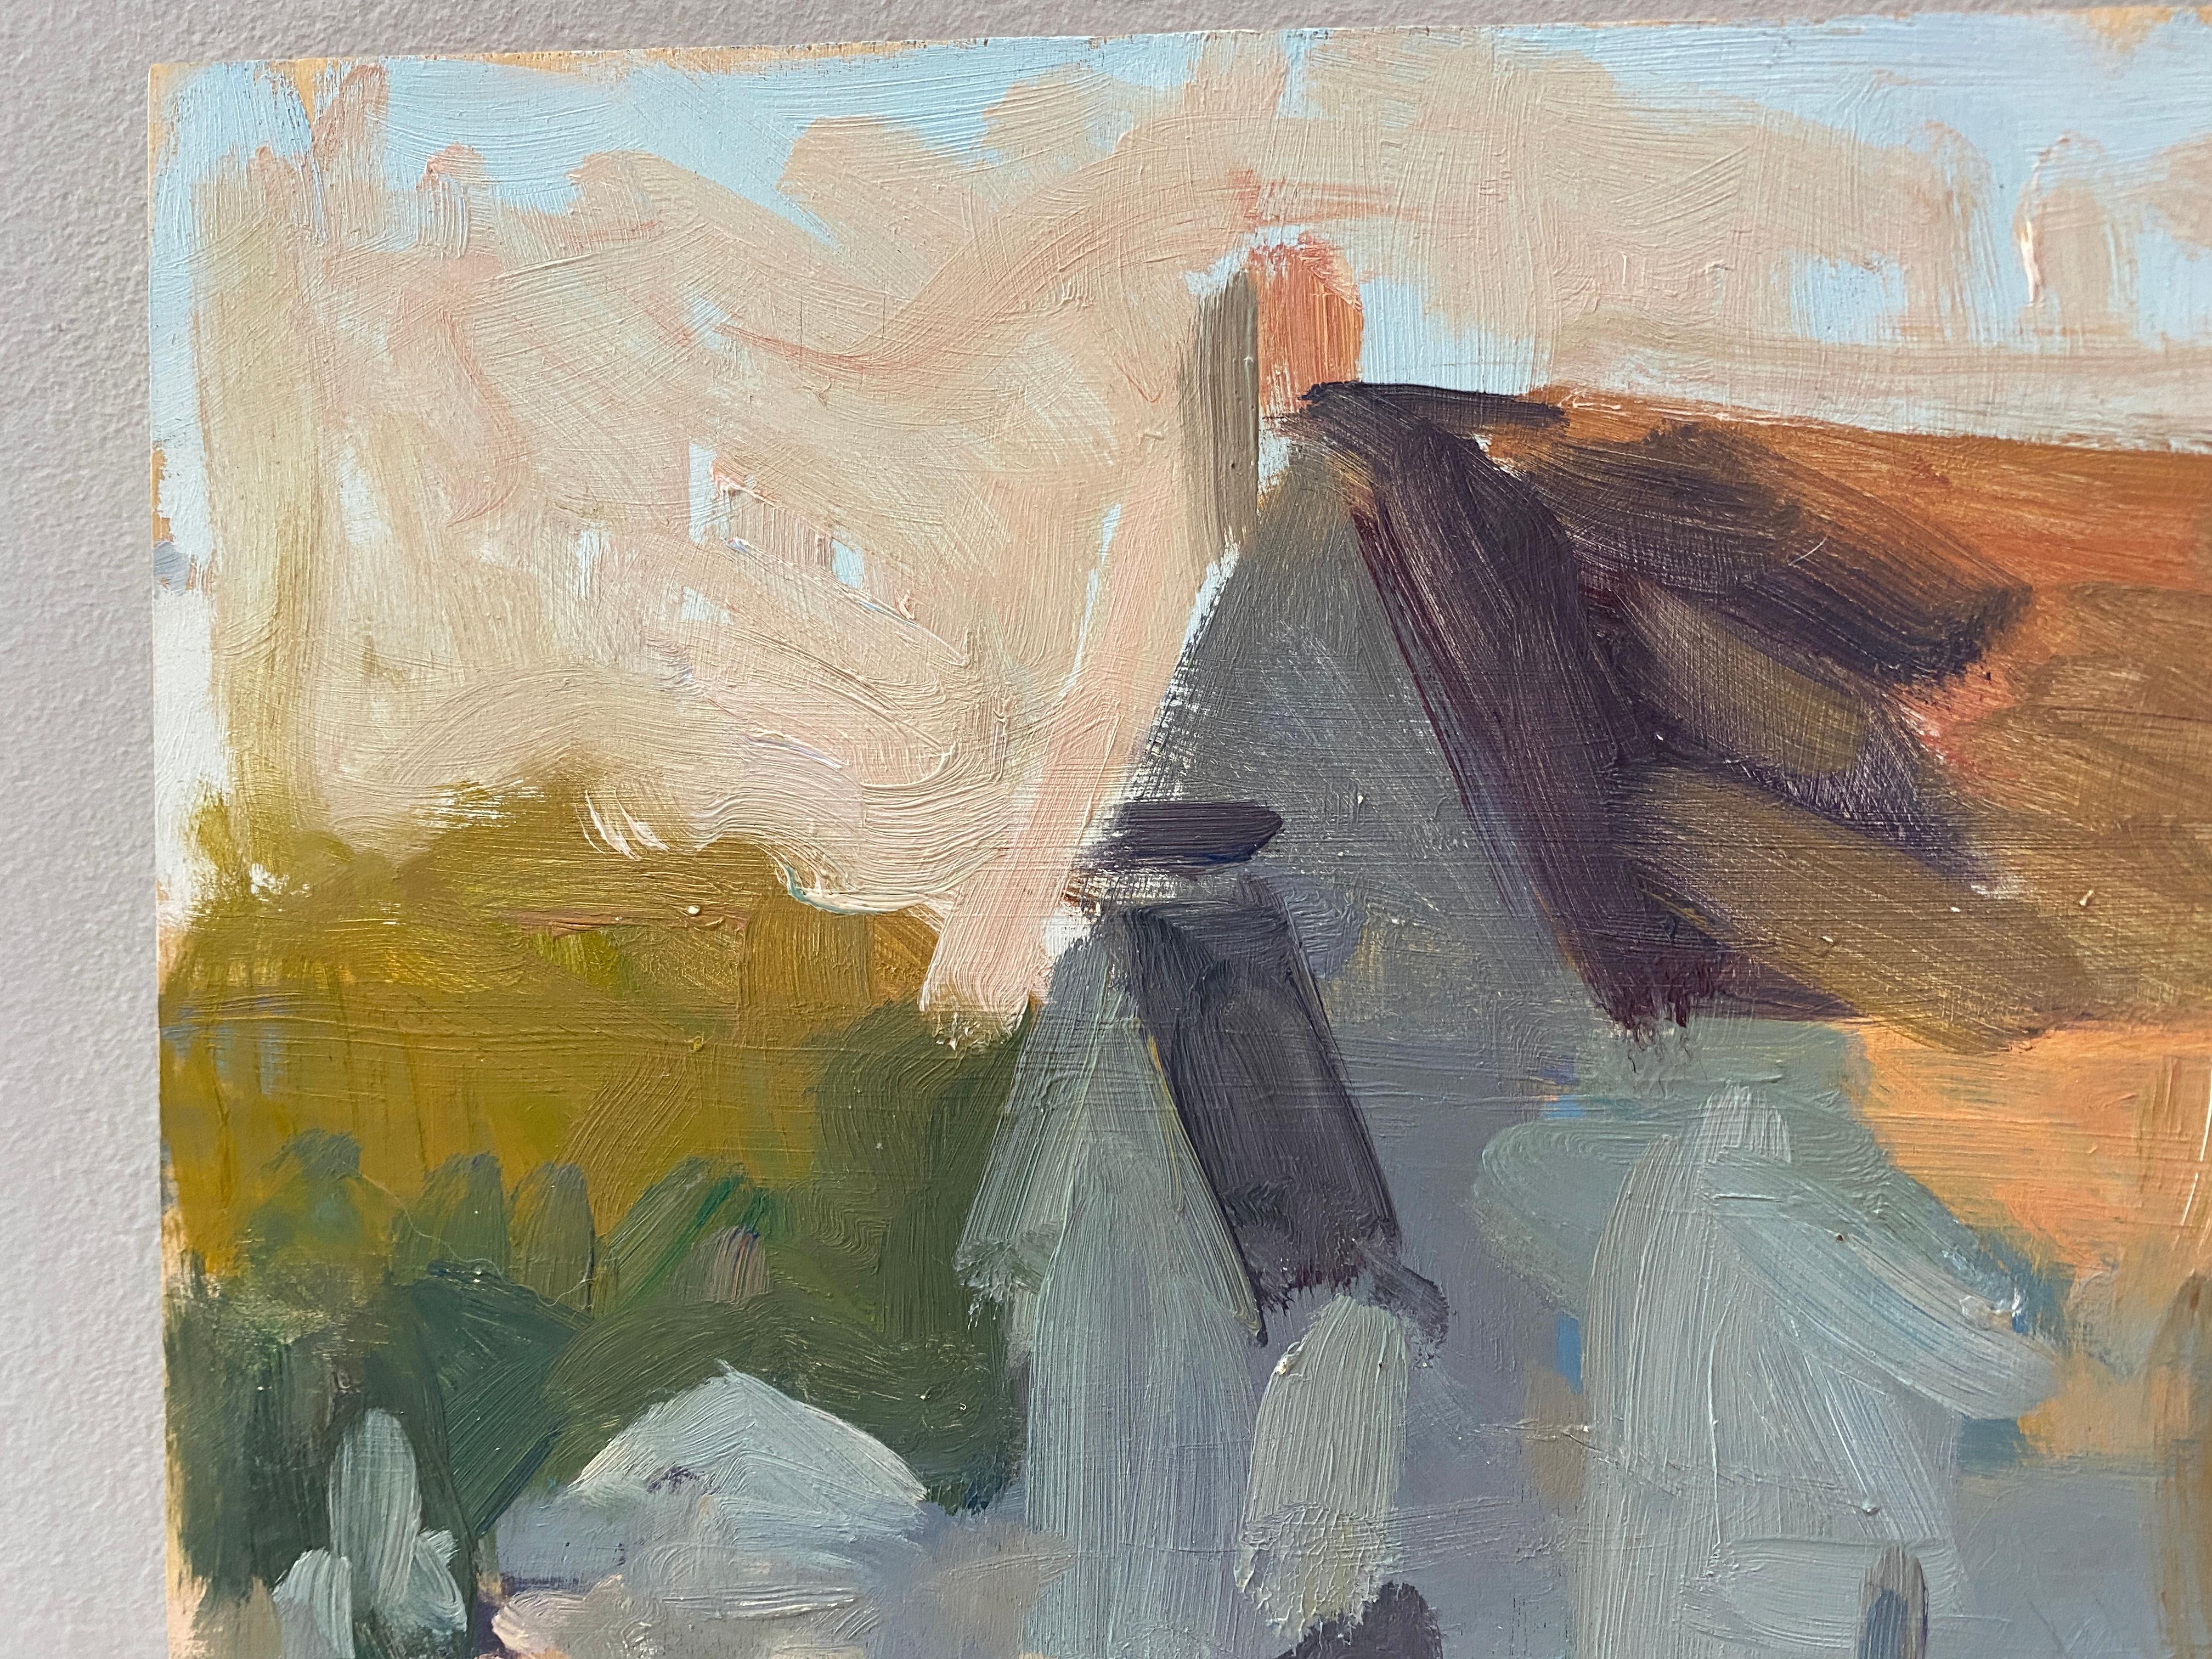 Late Afternoon, Church - Beige Abstract Painting by Ben Fenske